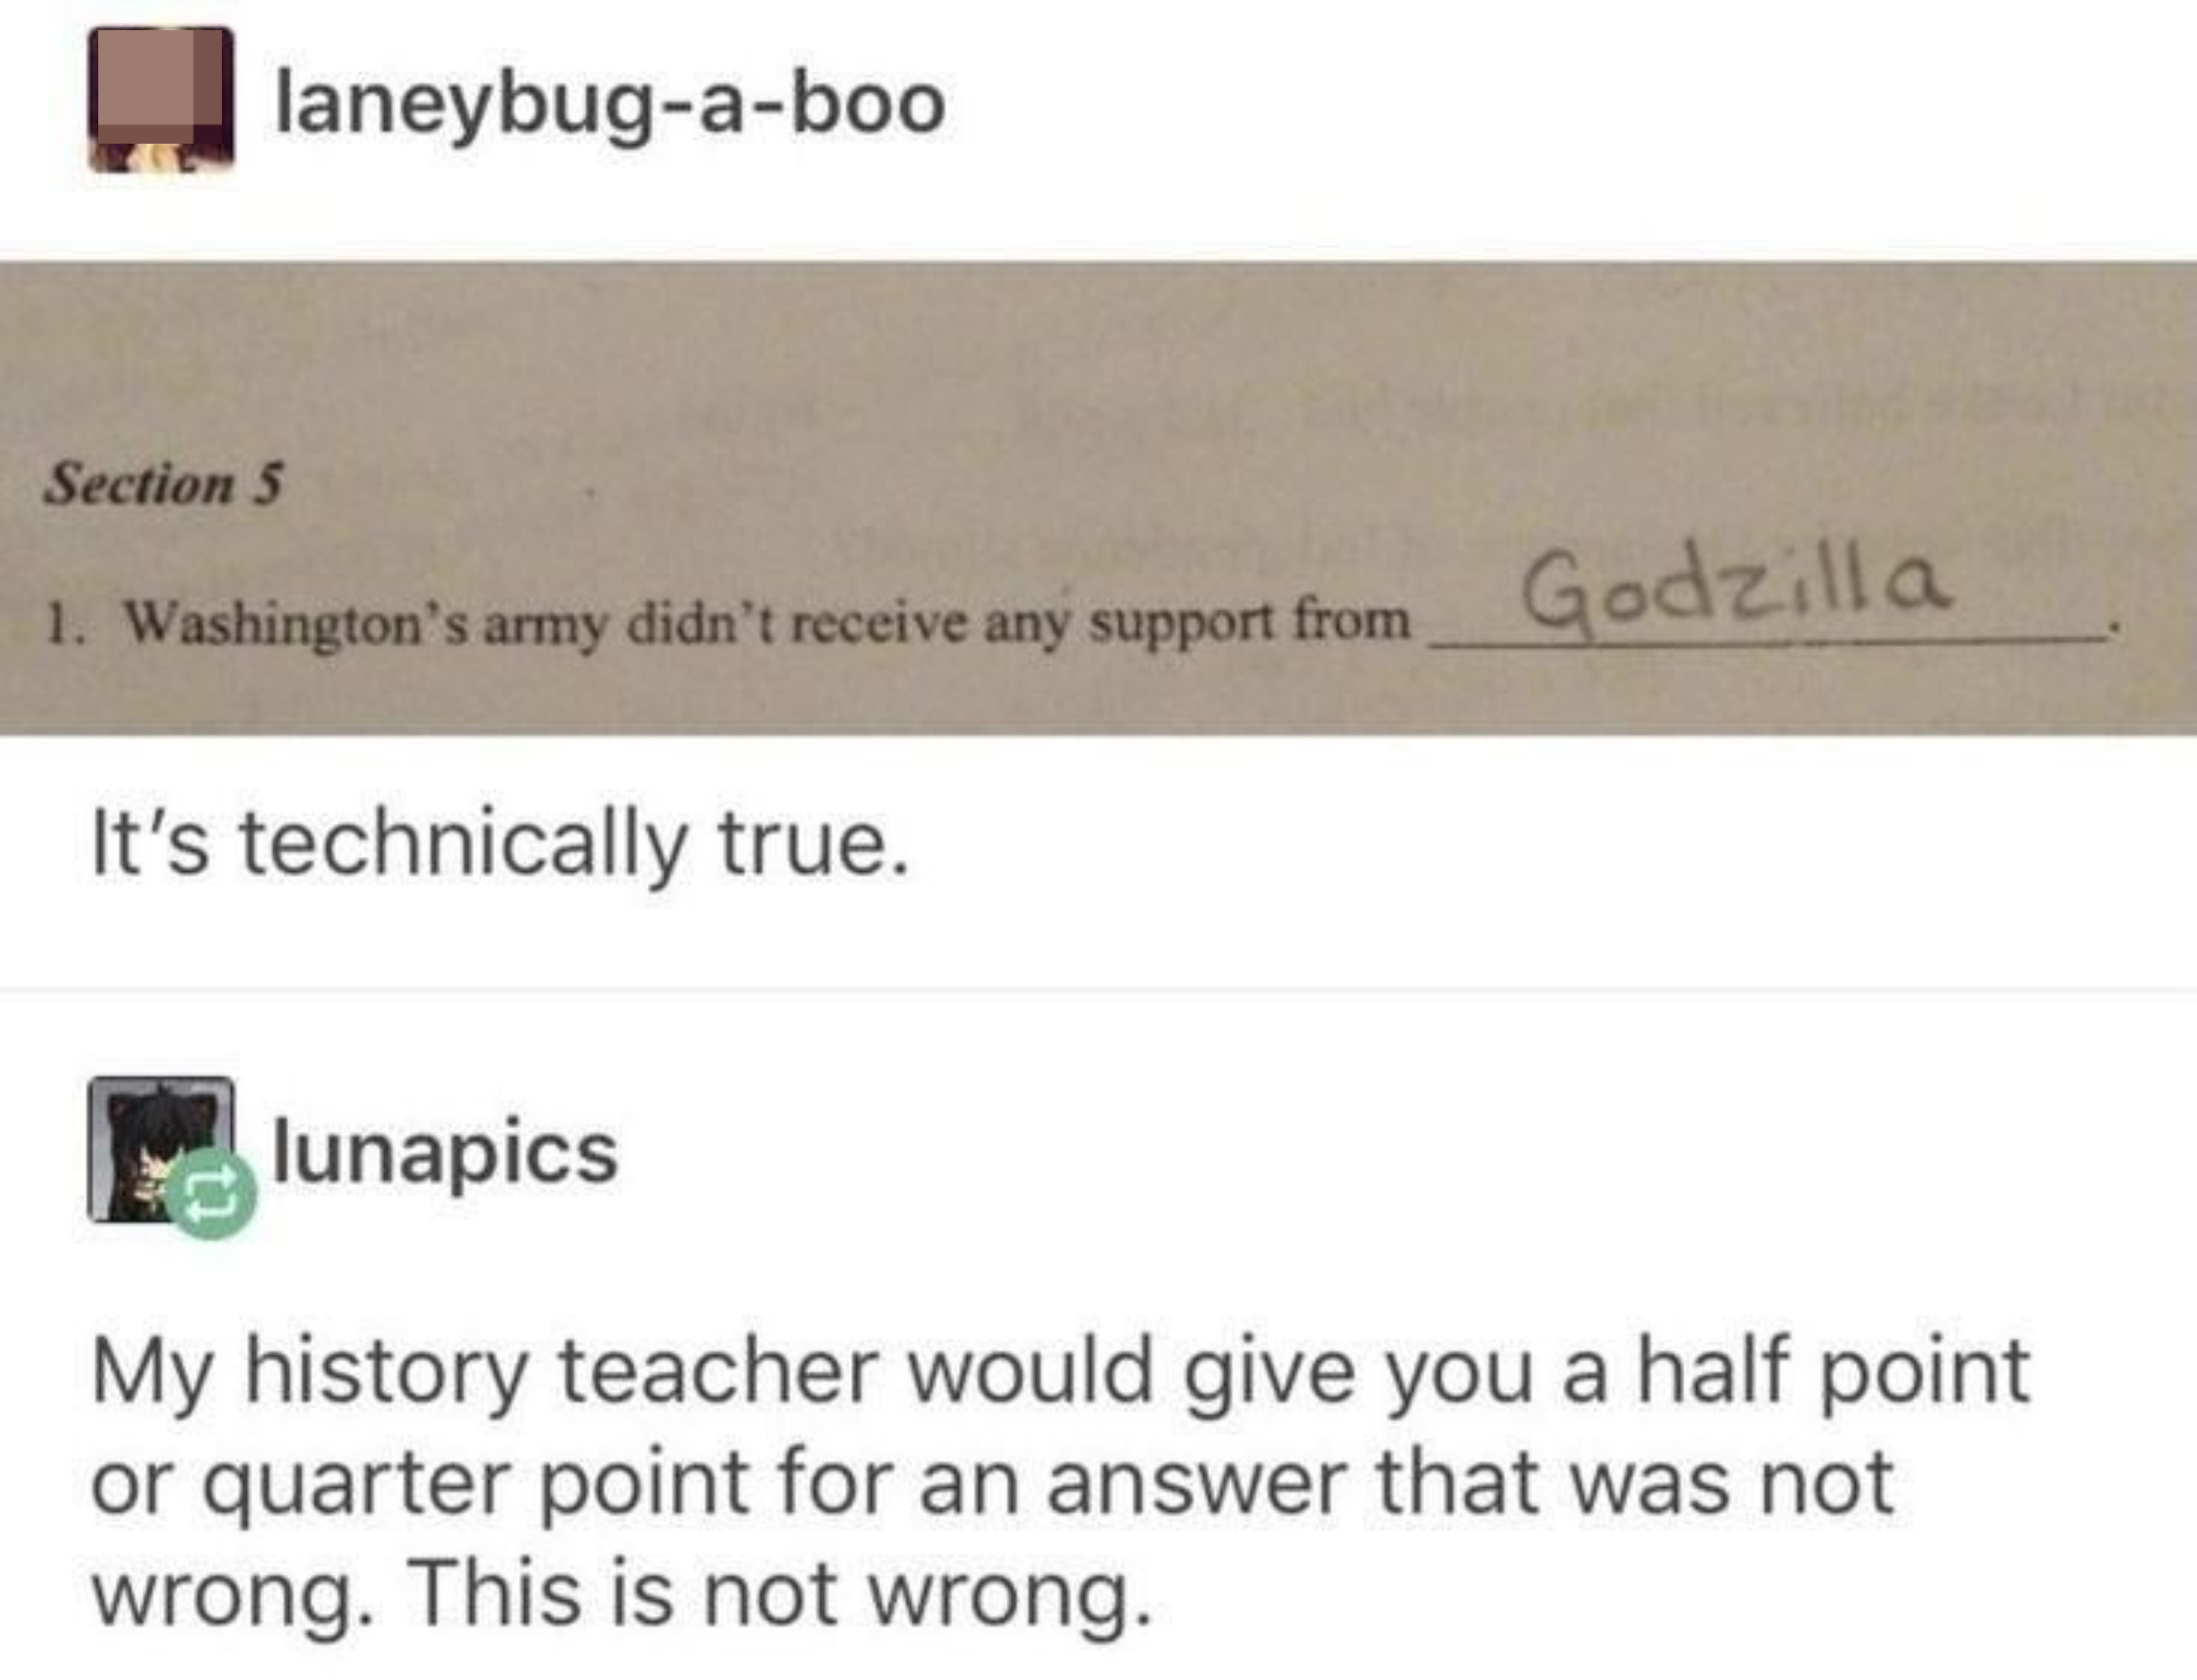 Question that says &quot;Washington&#x27;s army did not receive any support from ___&quot; and the response is &quot;Godzilla,&quot; and person says their history teacher would give a half point because the answer is not wrong